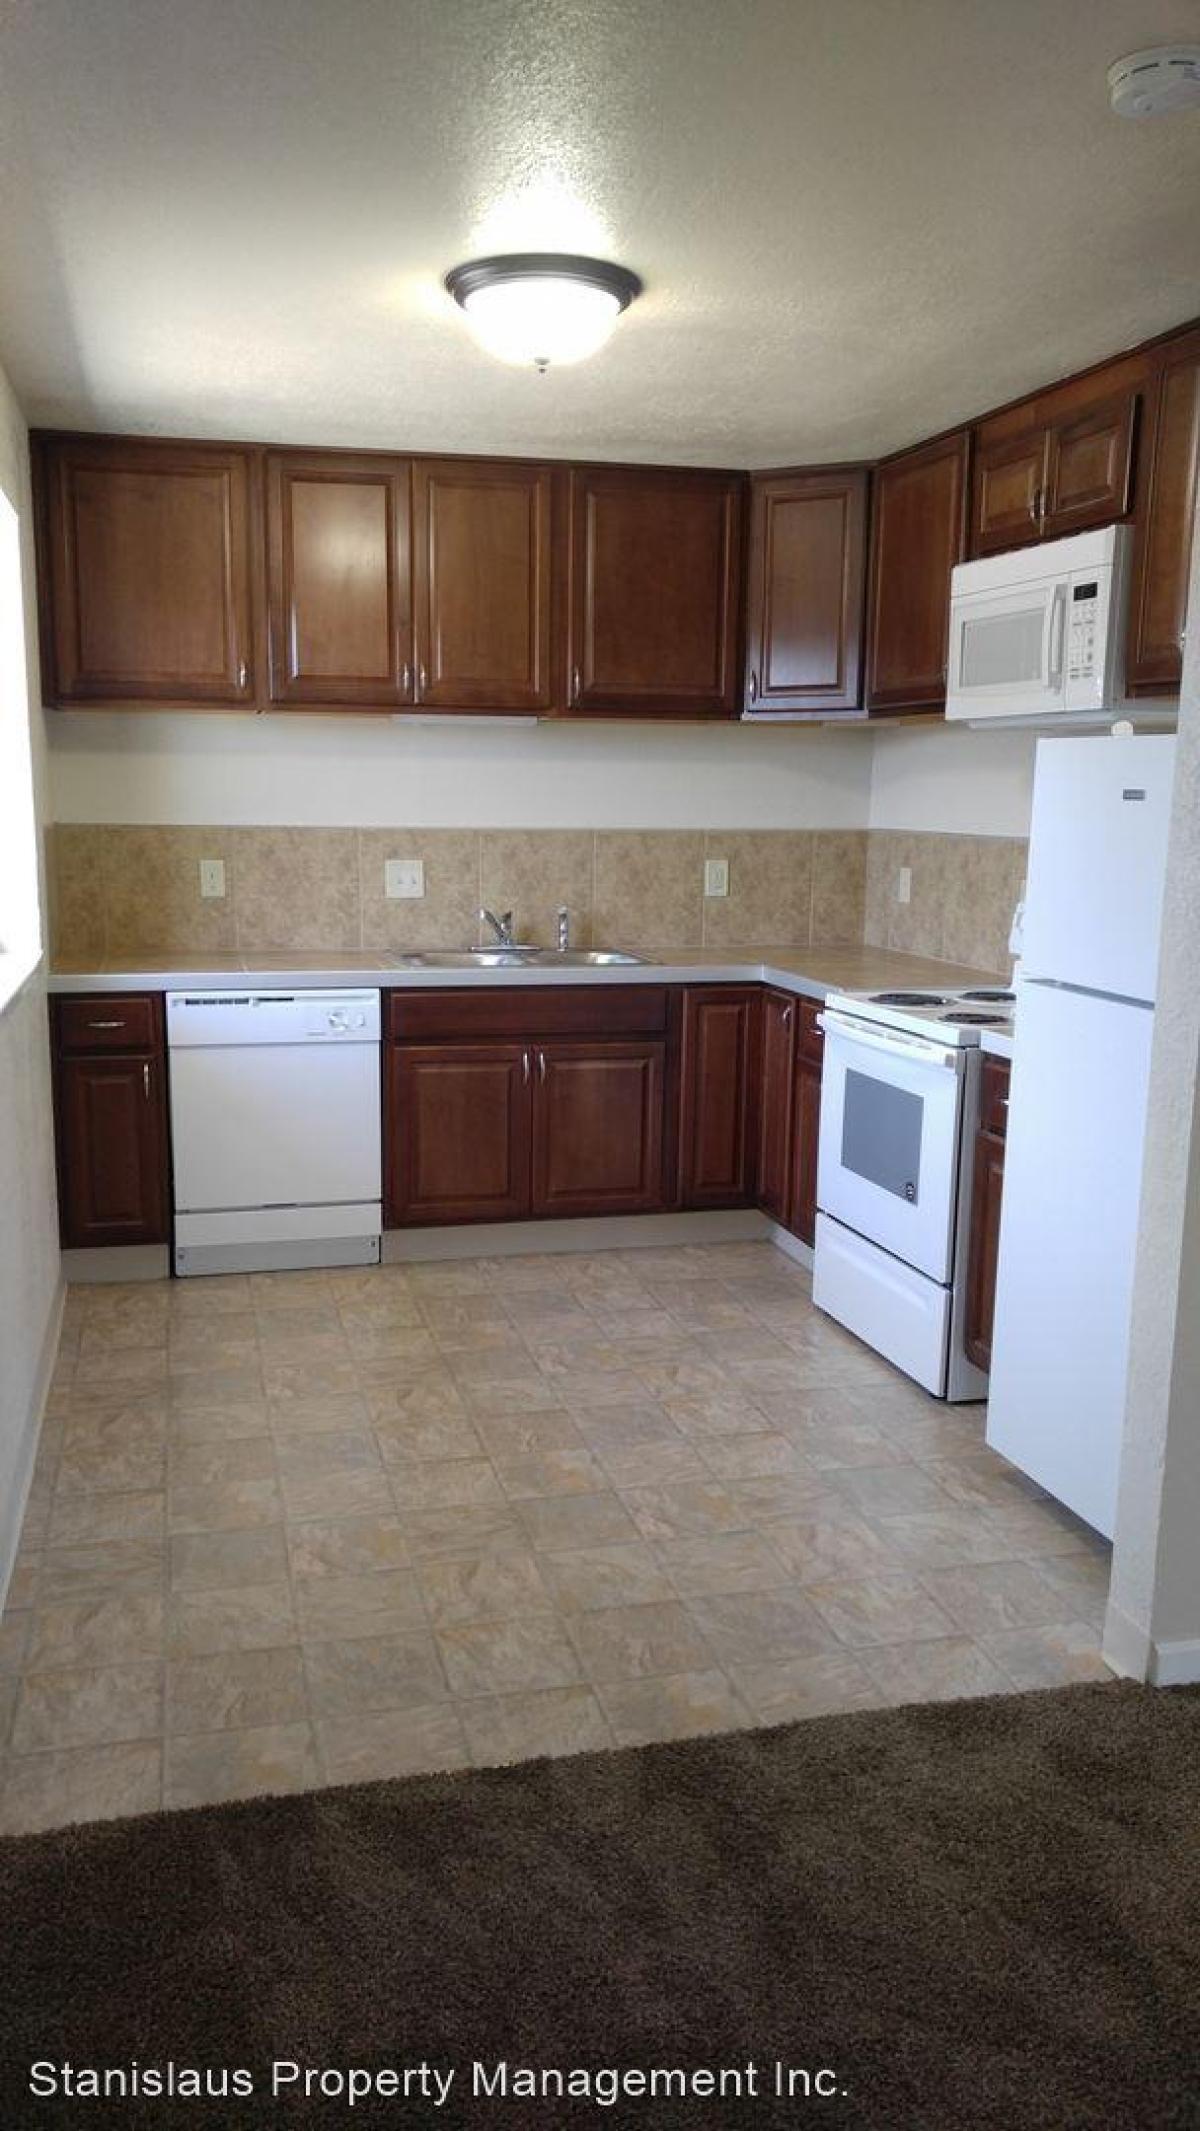 Picture of Apartment For Rent in Modesto, California, United States